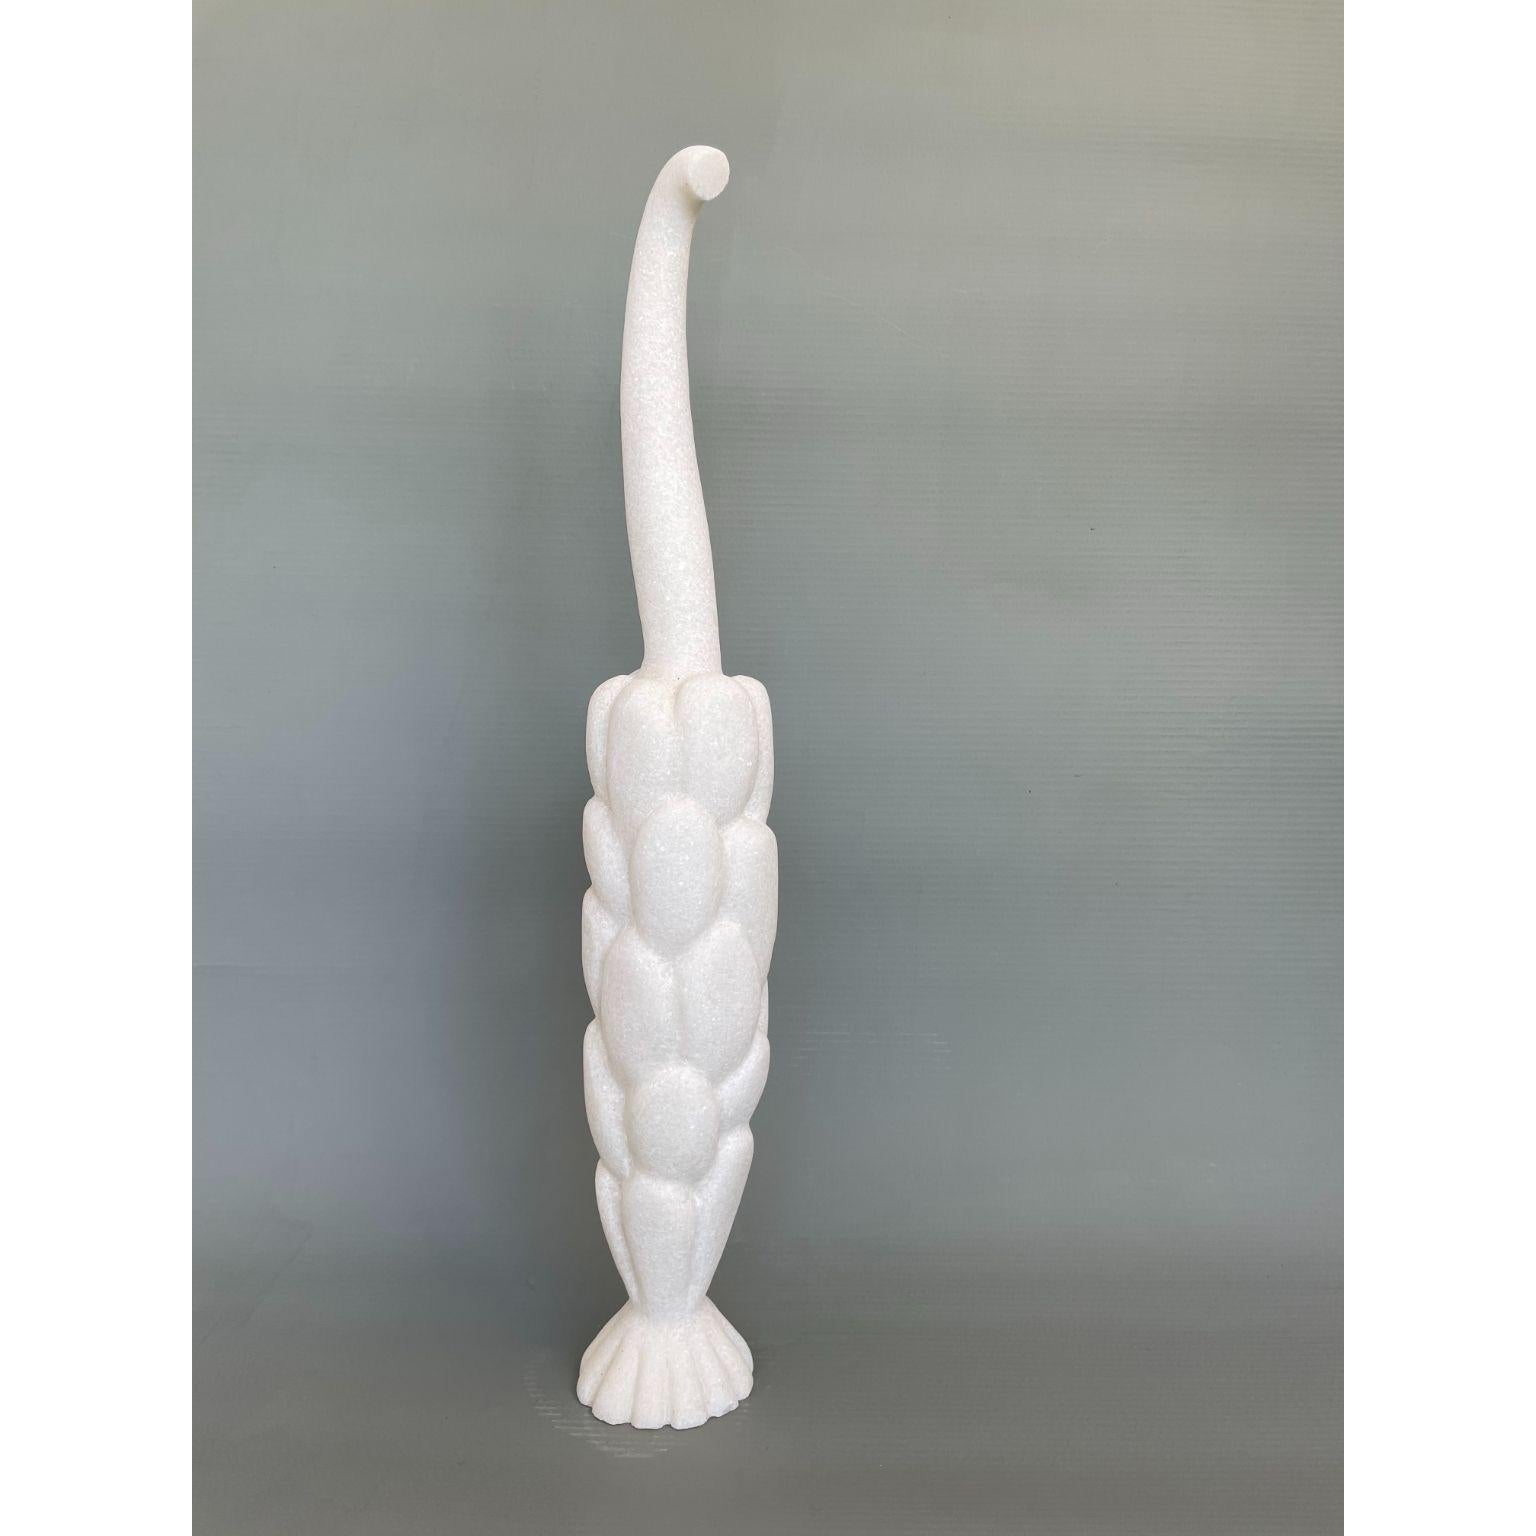 Sprout hand carved marble sculpture by Tom Von Kaenel
Dimensions: D13 x H72 cm
Materials: Marble

Tom von Kaenel, sculptor and painter, was born in Switzerland in 1961. Already in his early
childhood he was deeply devoted to art. His desire to